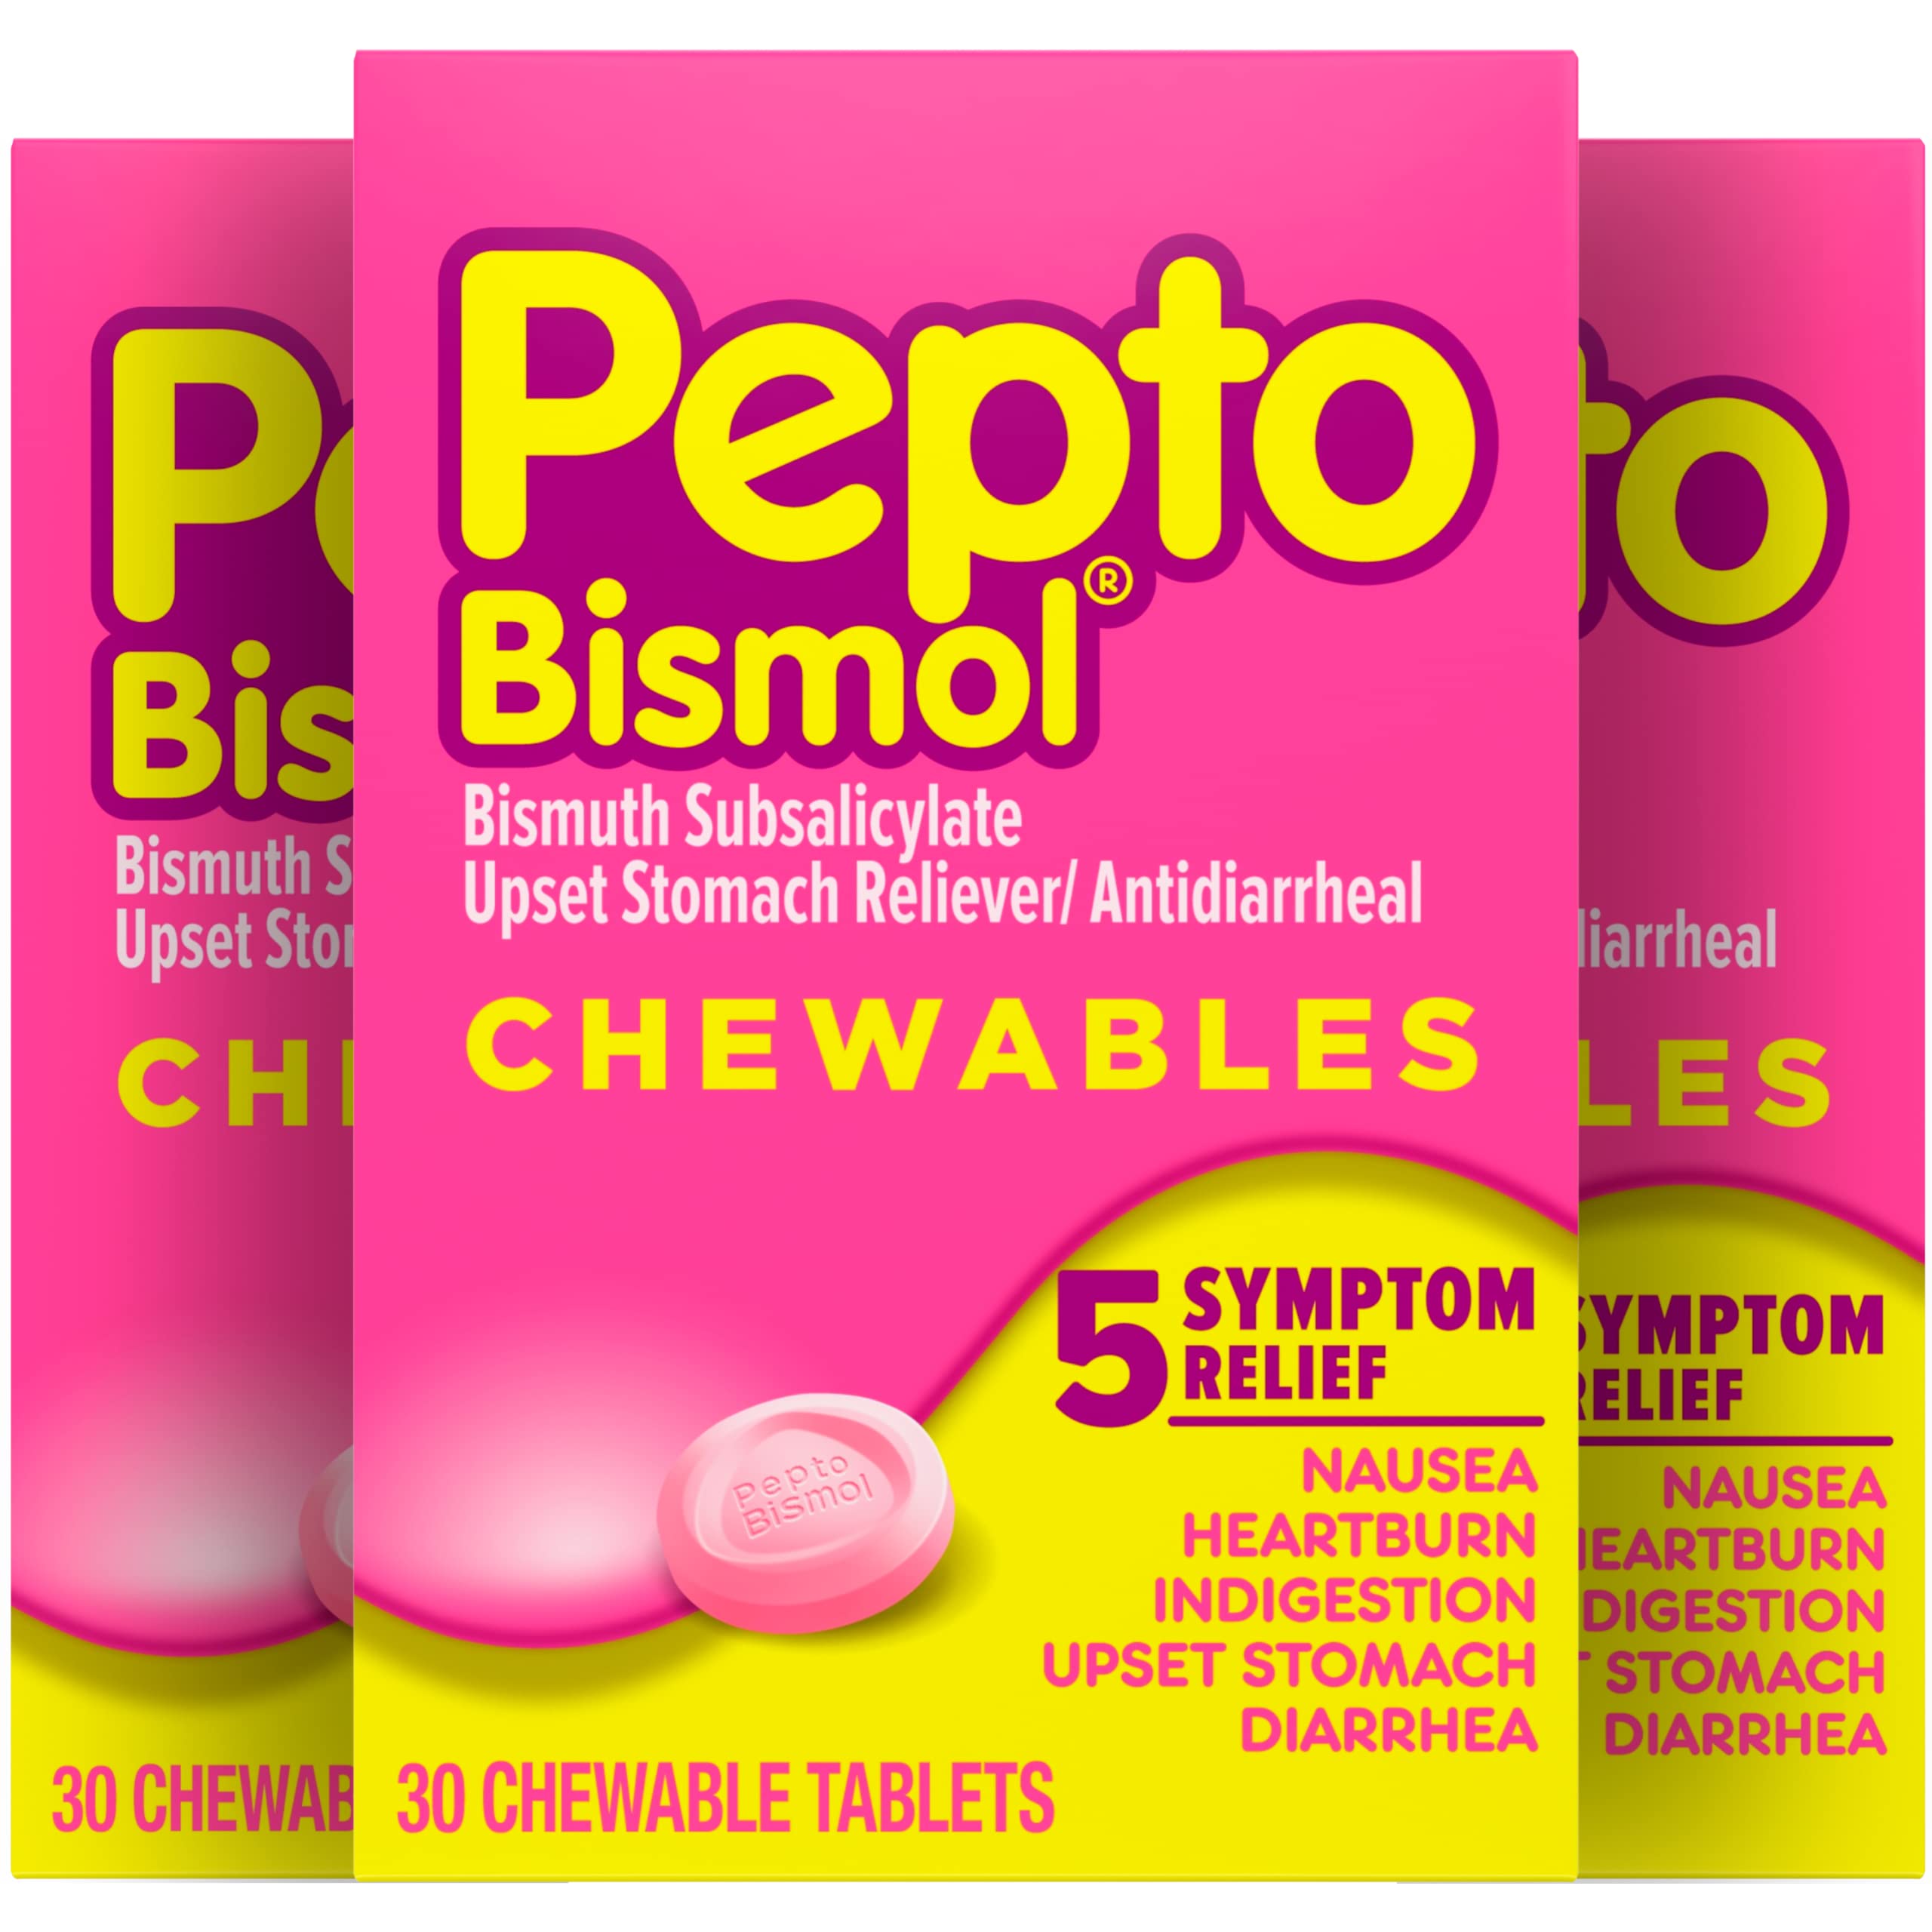 Pepto Bismol Chewable Tablets for Nausea, Heartburn, Indigestion, Upset Stomach, and Diarrhea Relief, Original Flavor